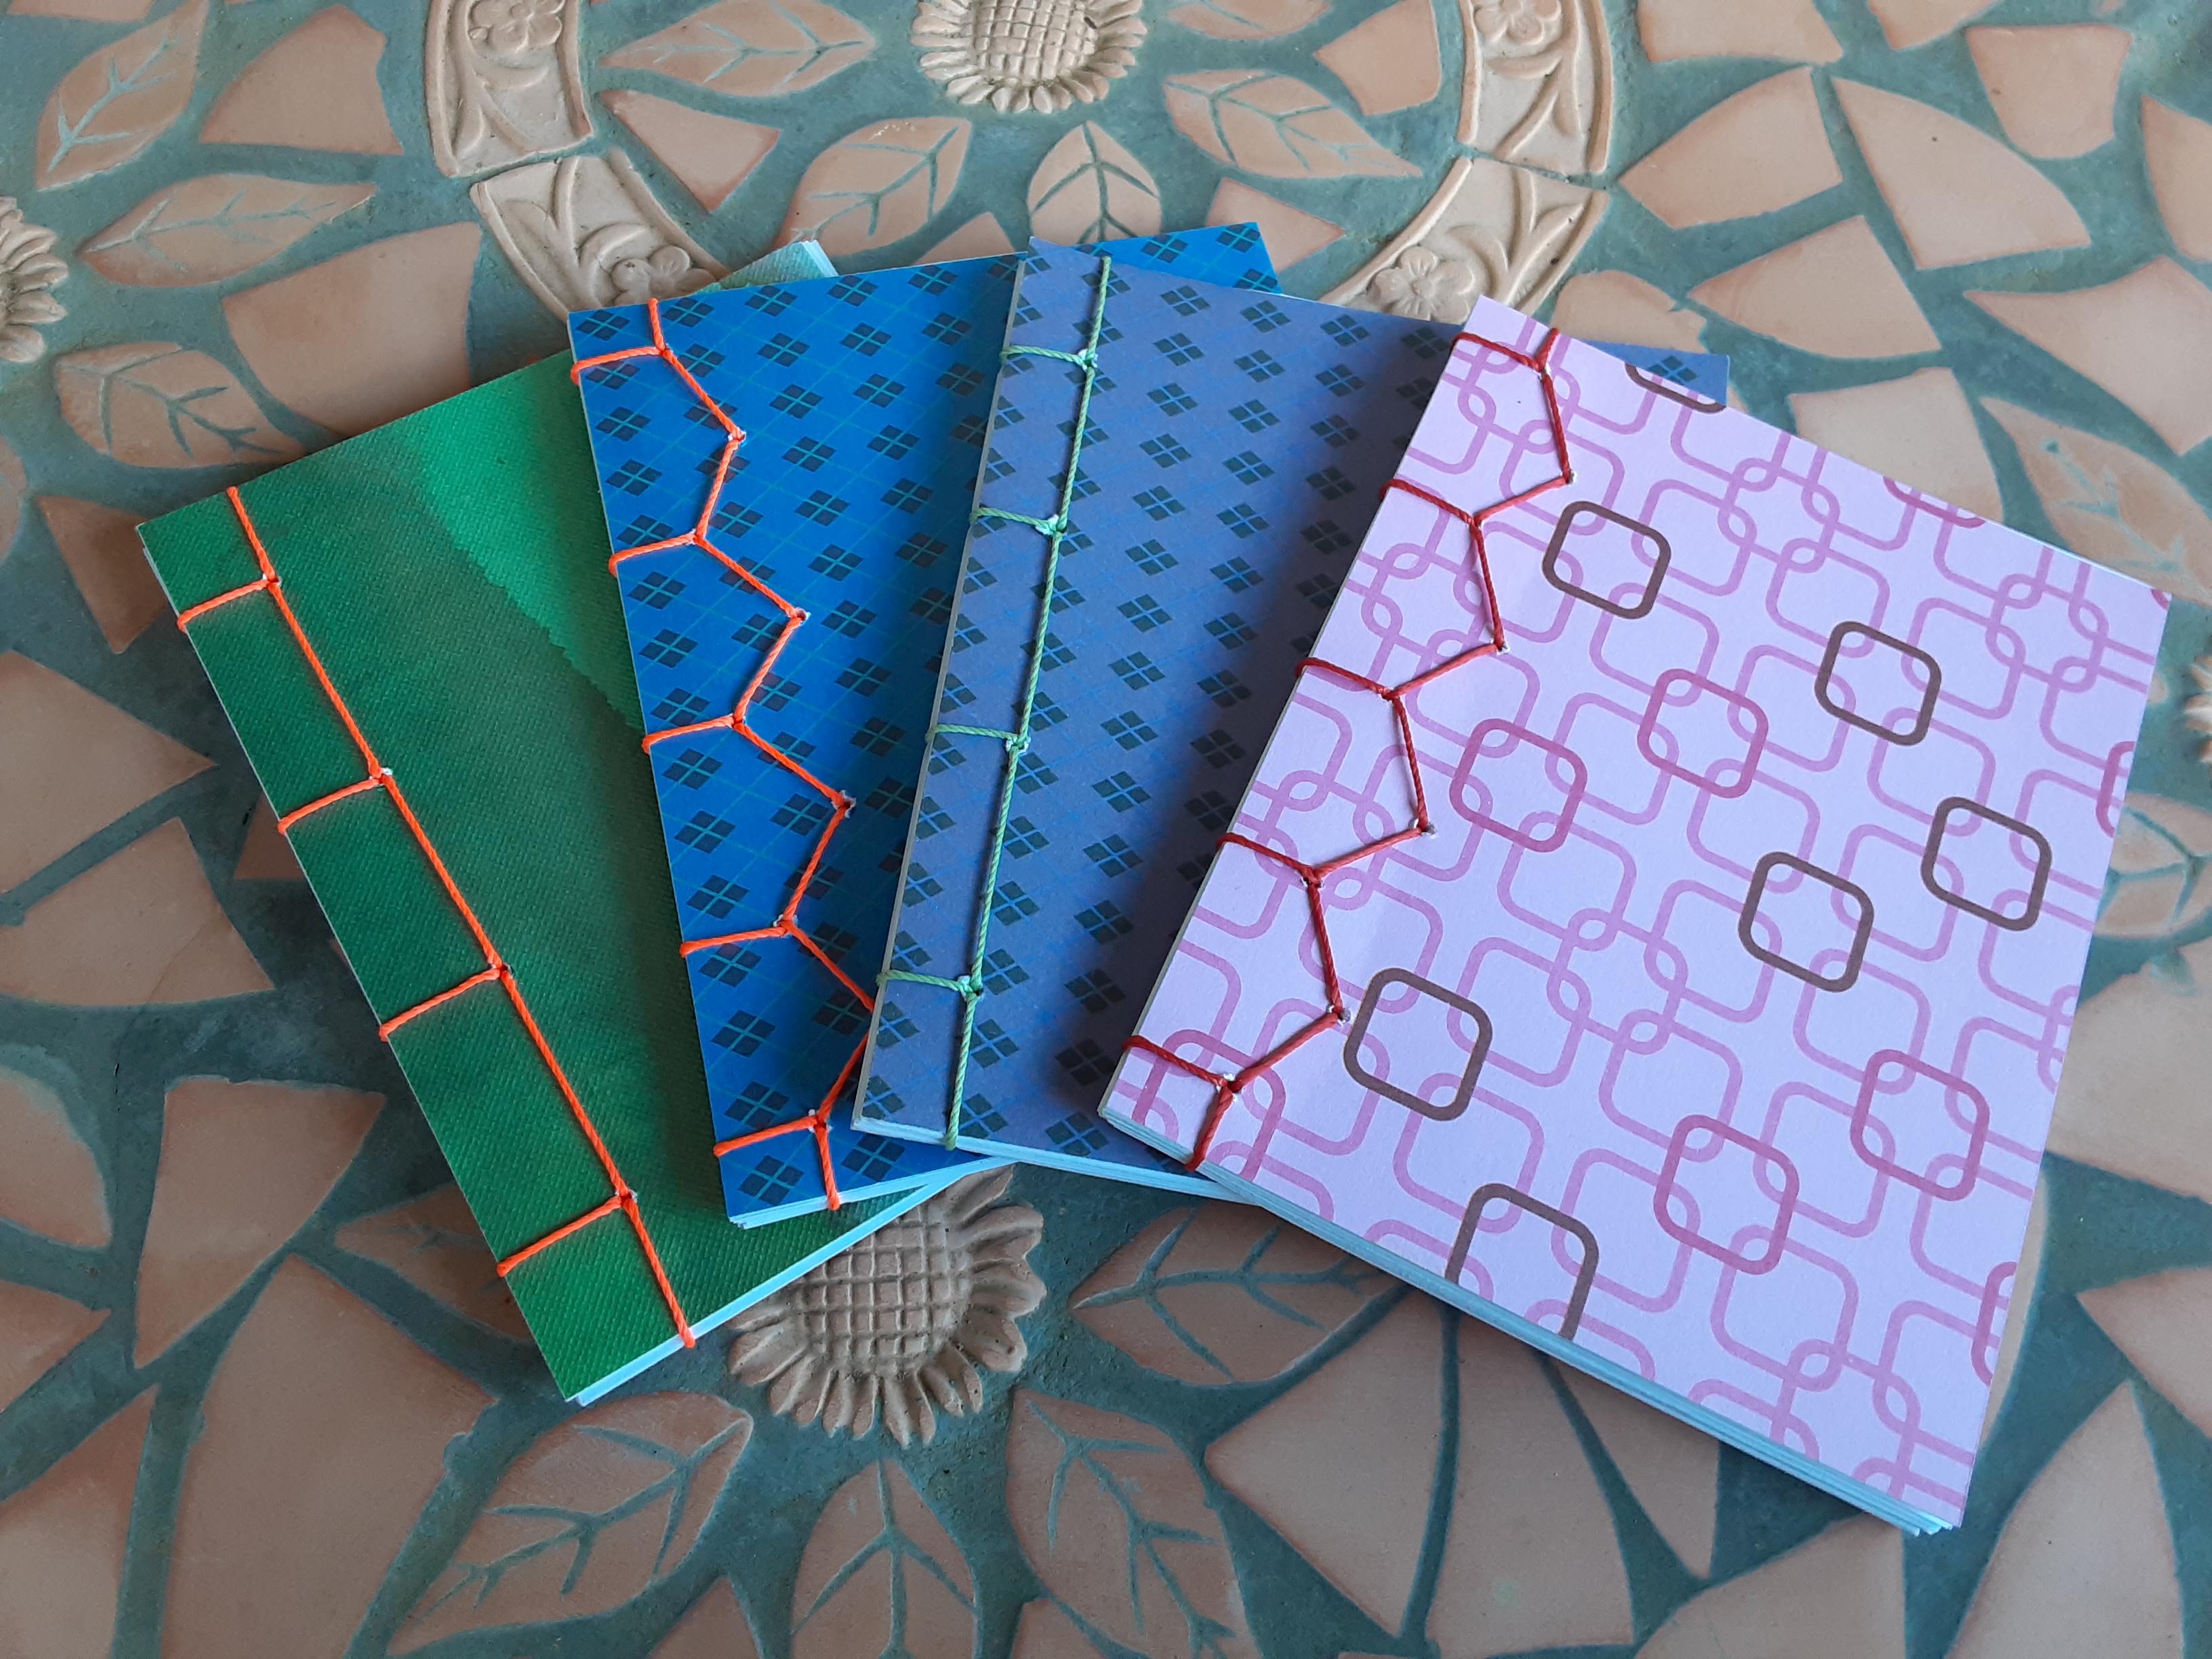 4 small notebooks bound using the Japanese stab-stitch technique.